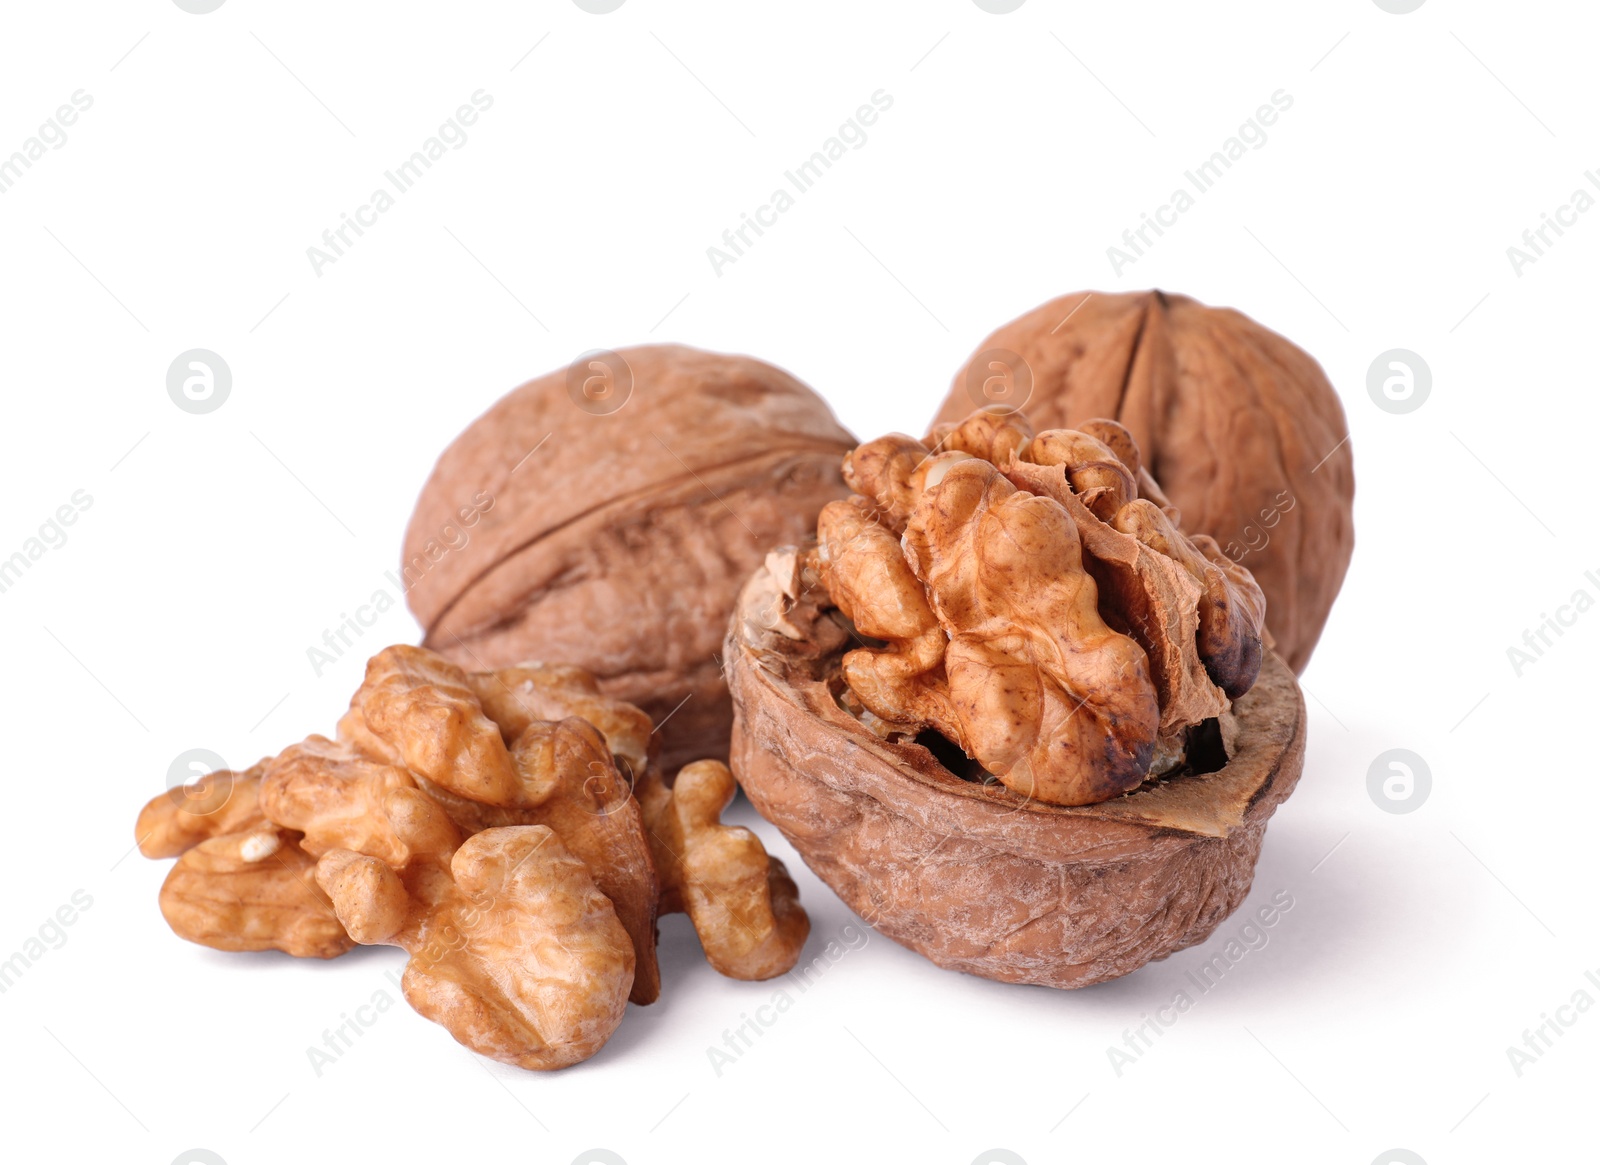 Photo of Walnuts in shell and kernels on white background, Organic snack